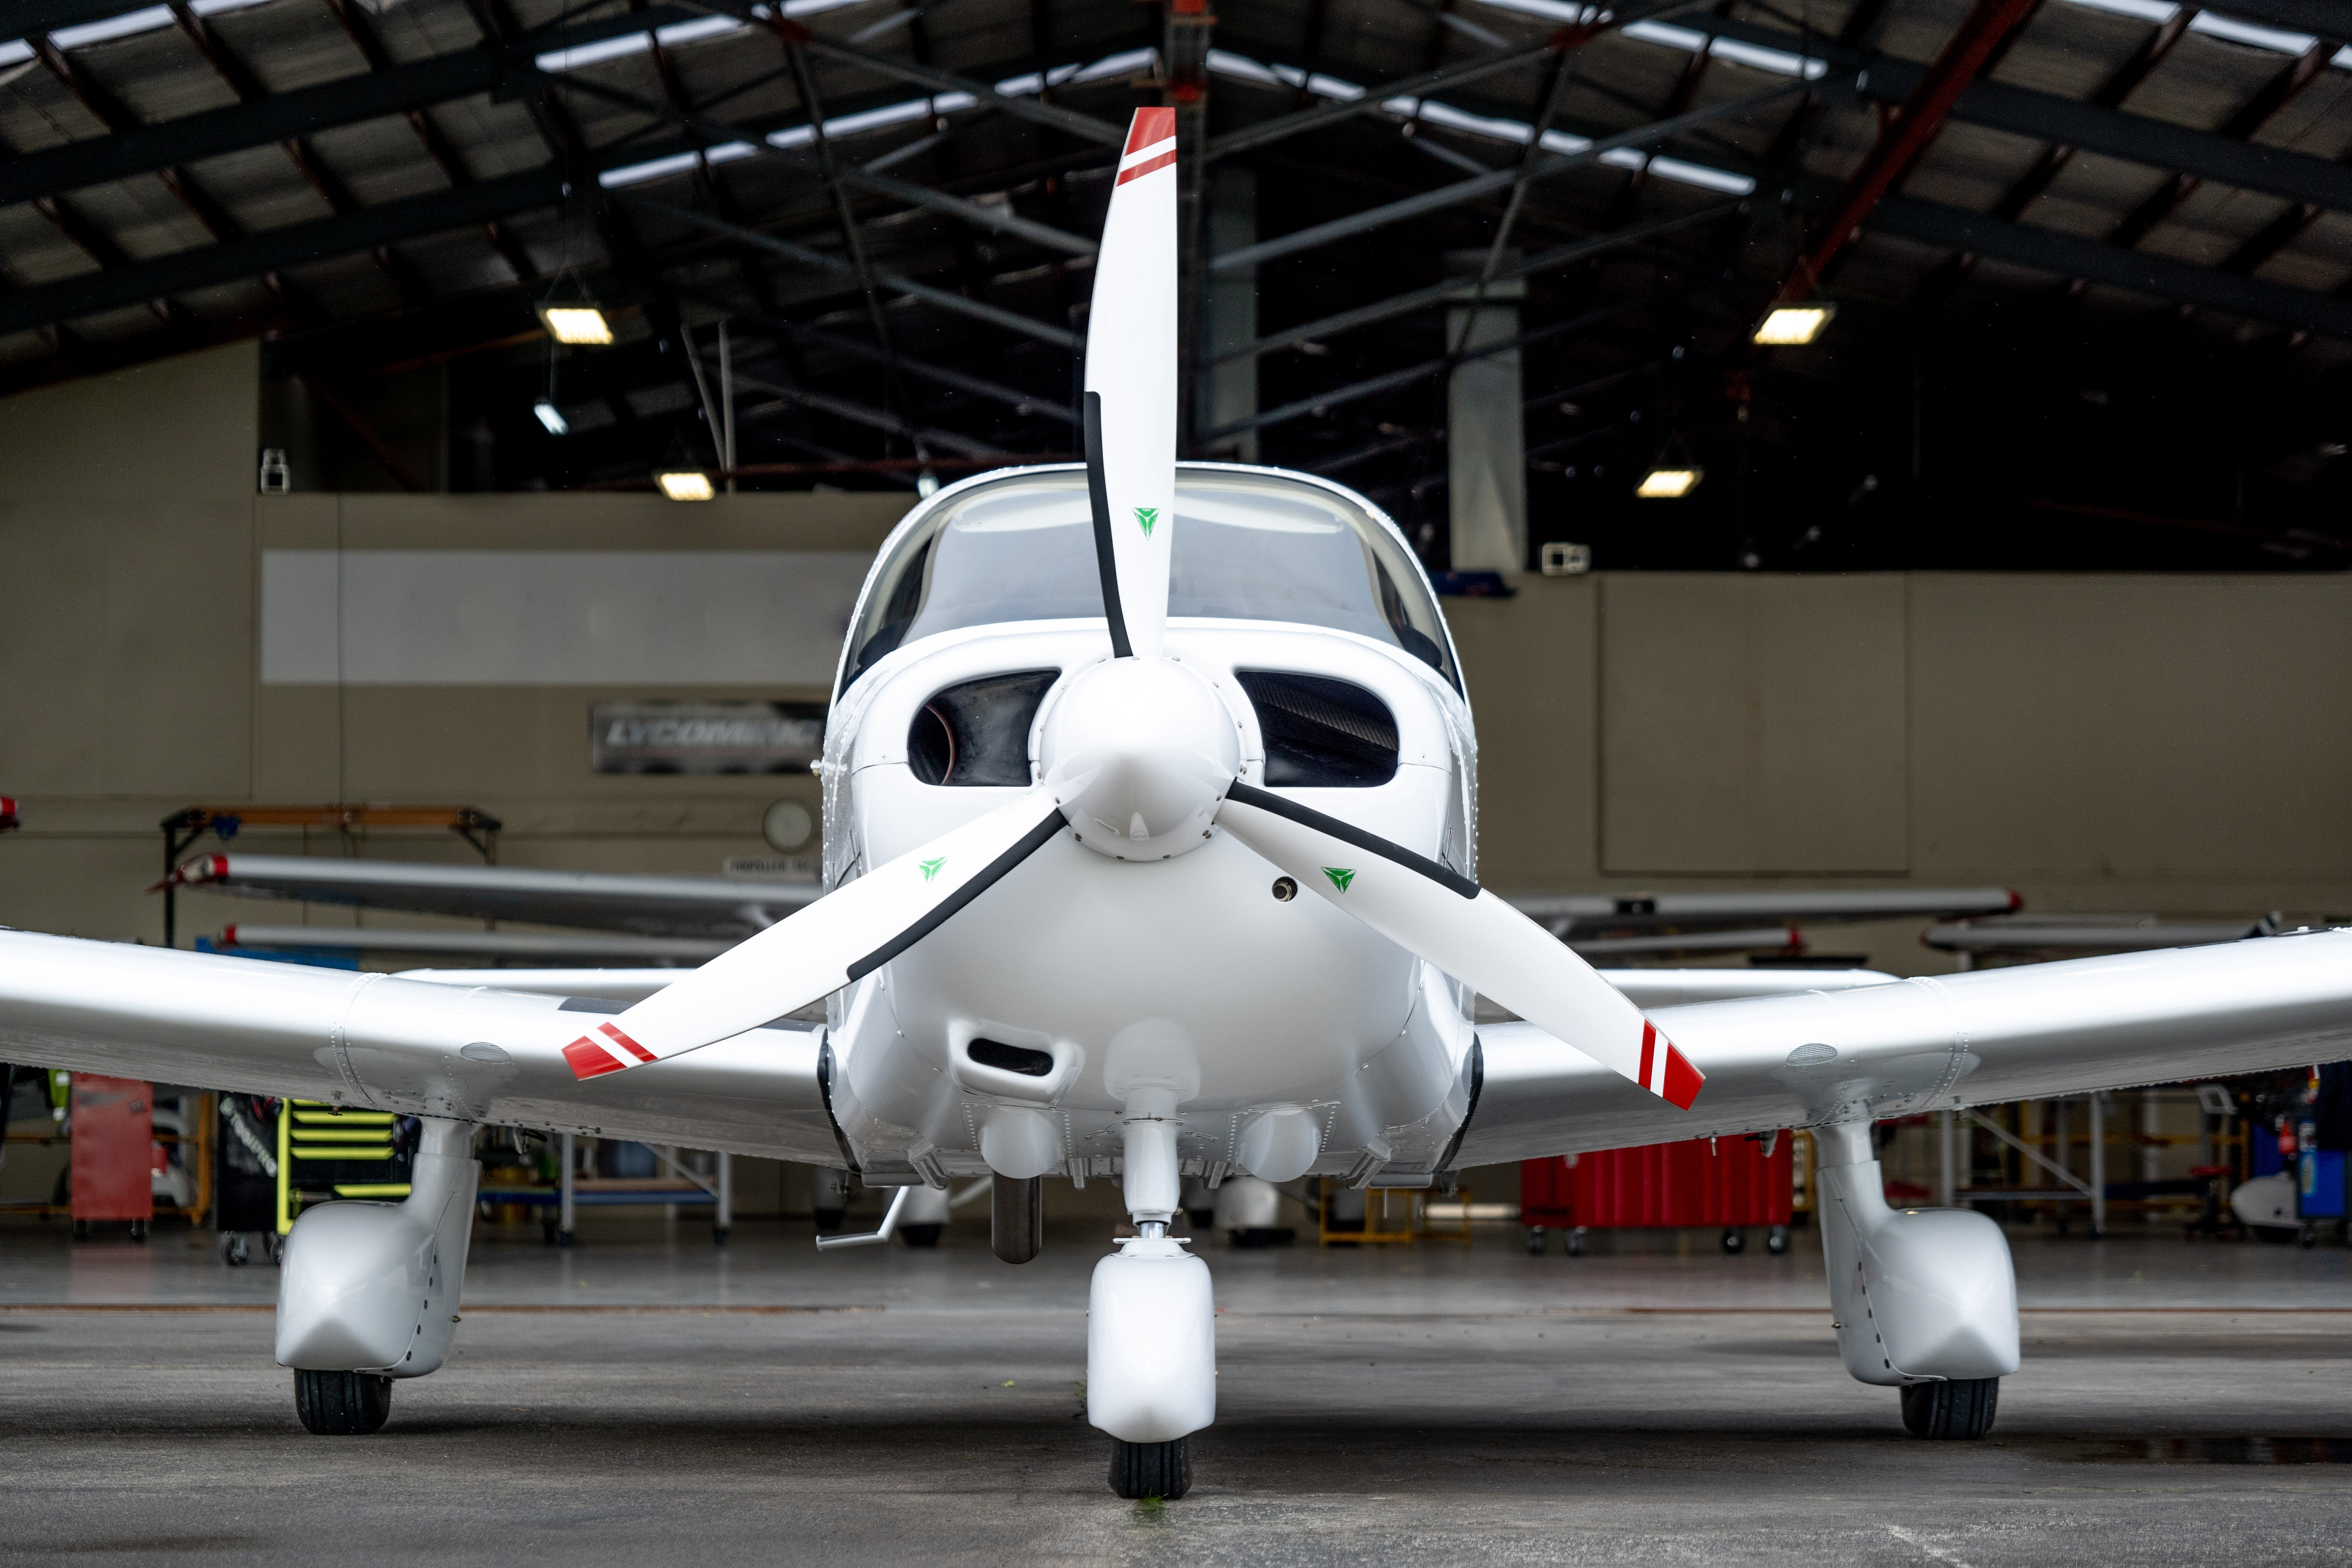 Fixed wing aircraft in hangar front on